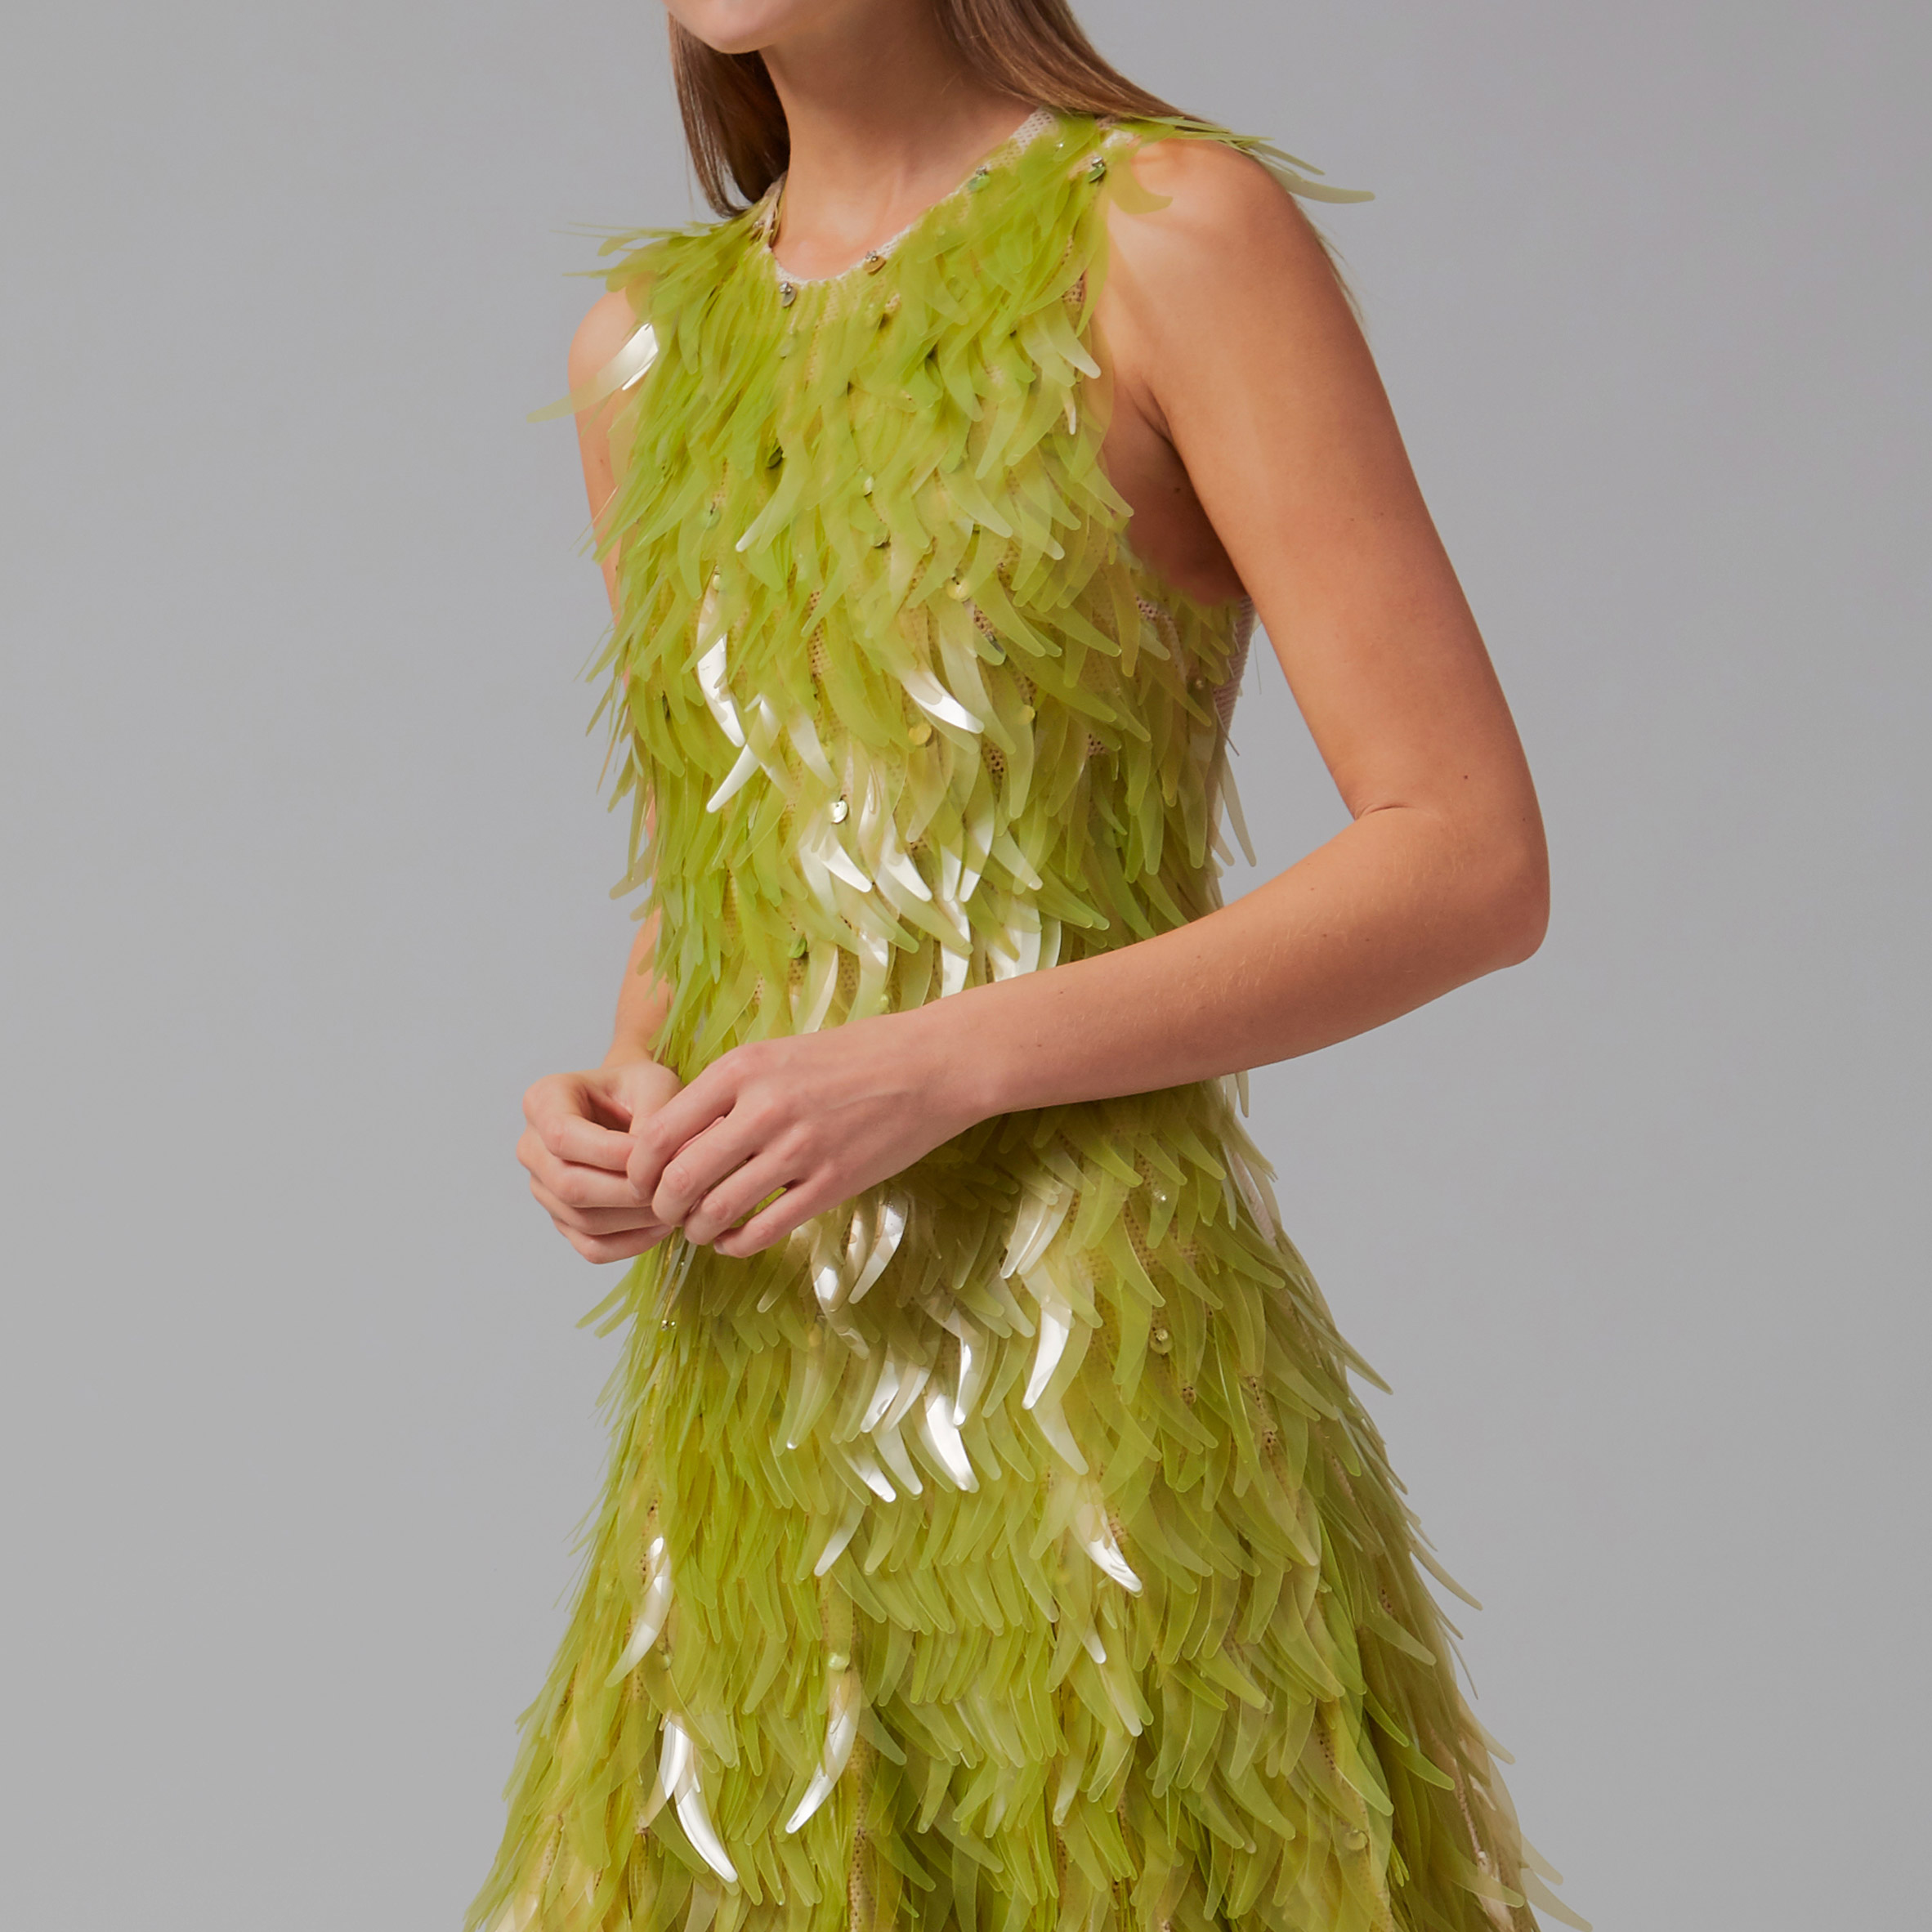 Close up of algae sequin dress by Phillip Lim and Charlotte McCurdy as part of One X One project